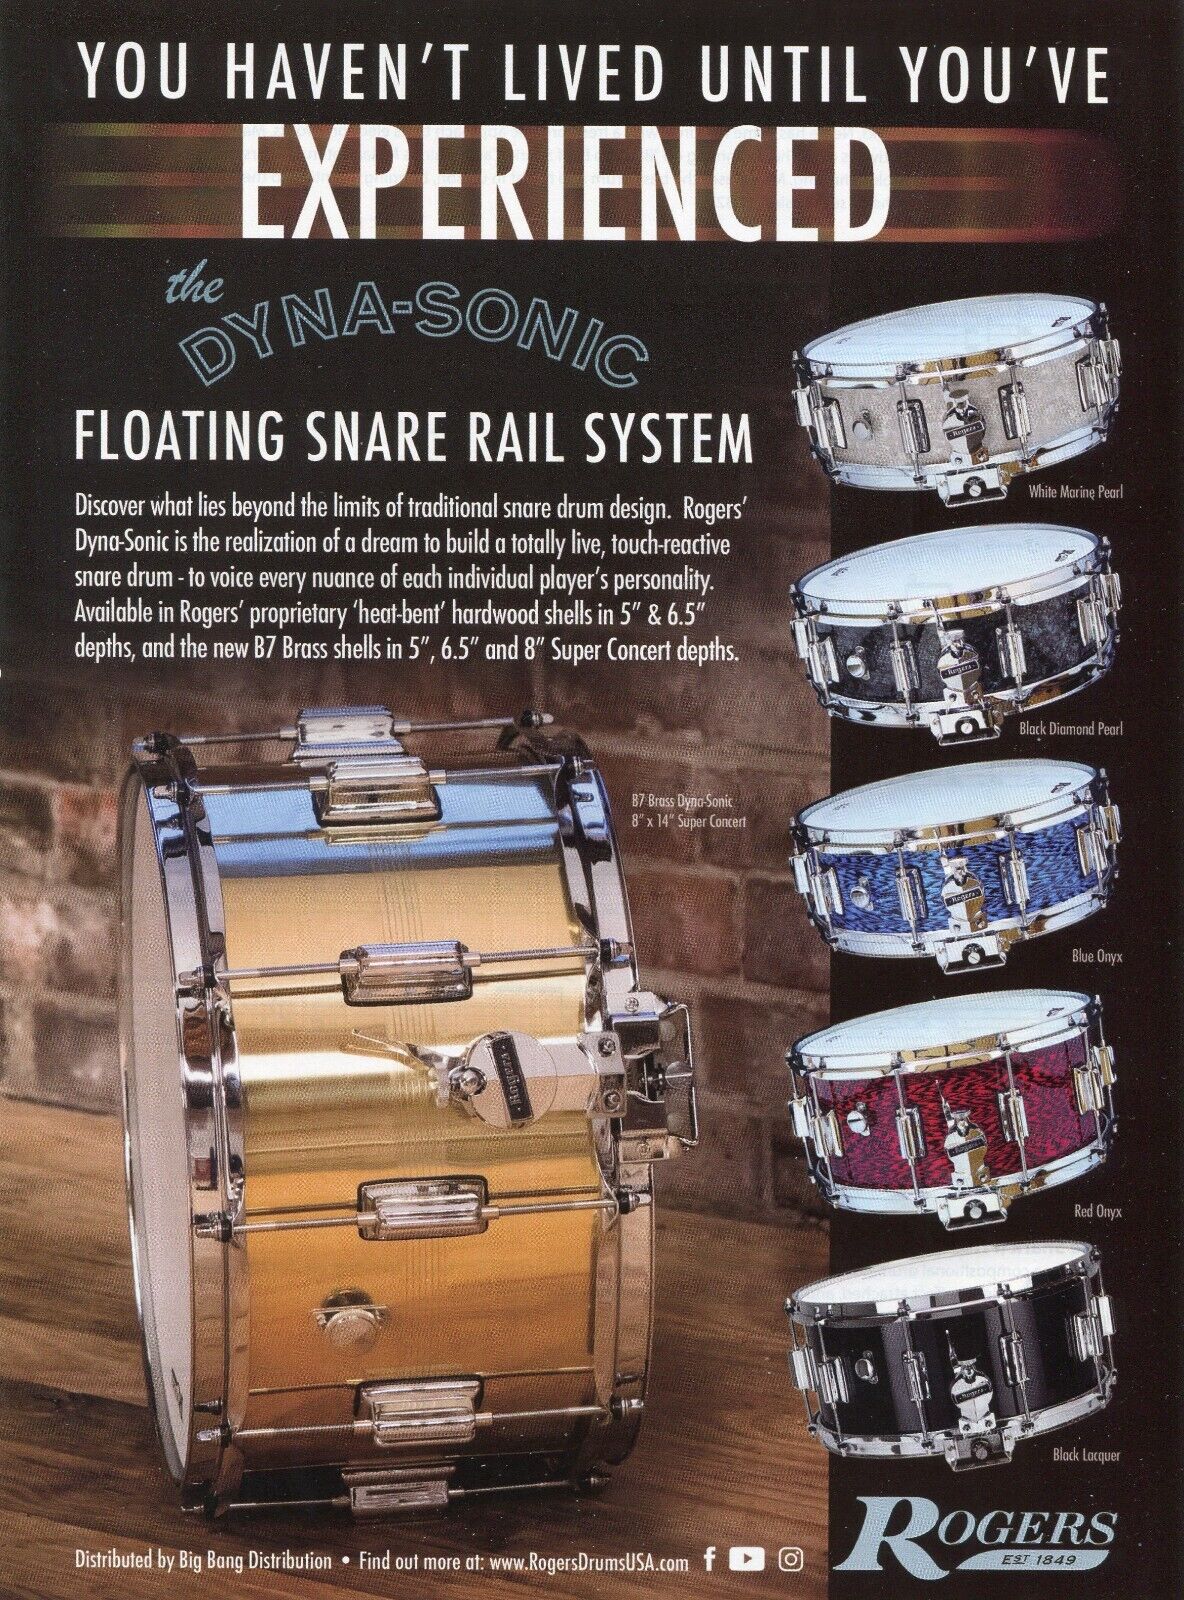 2021 Print Ad of Rogers Dyna-Sonic Snare Drums B7 Brass, Pearl, Blue & Red Onyx